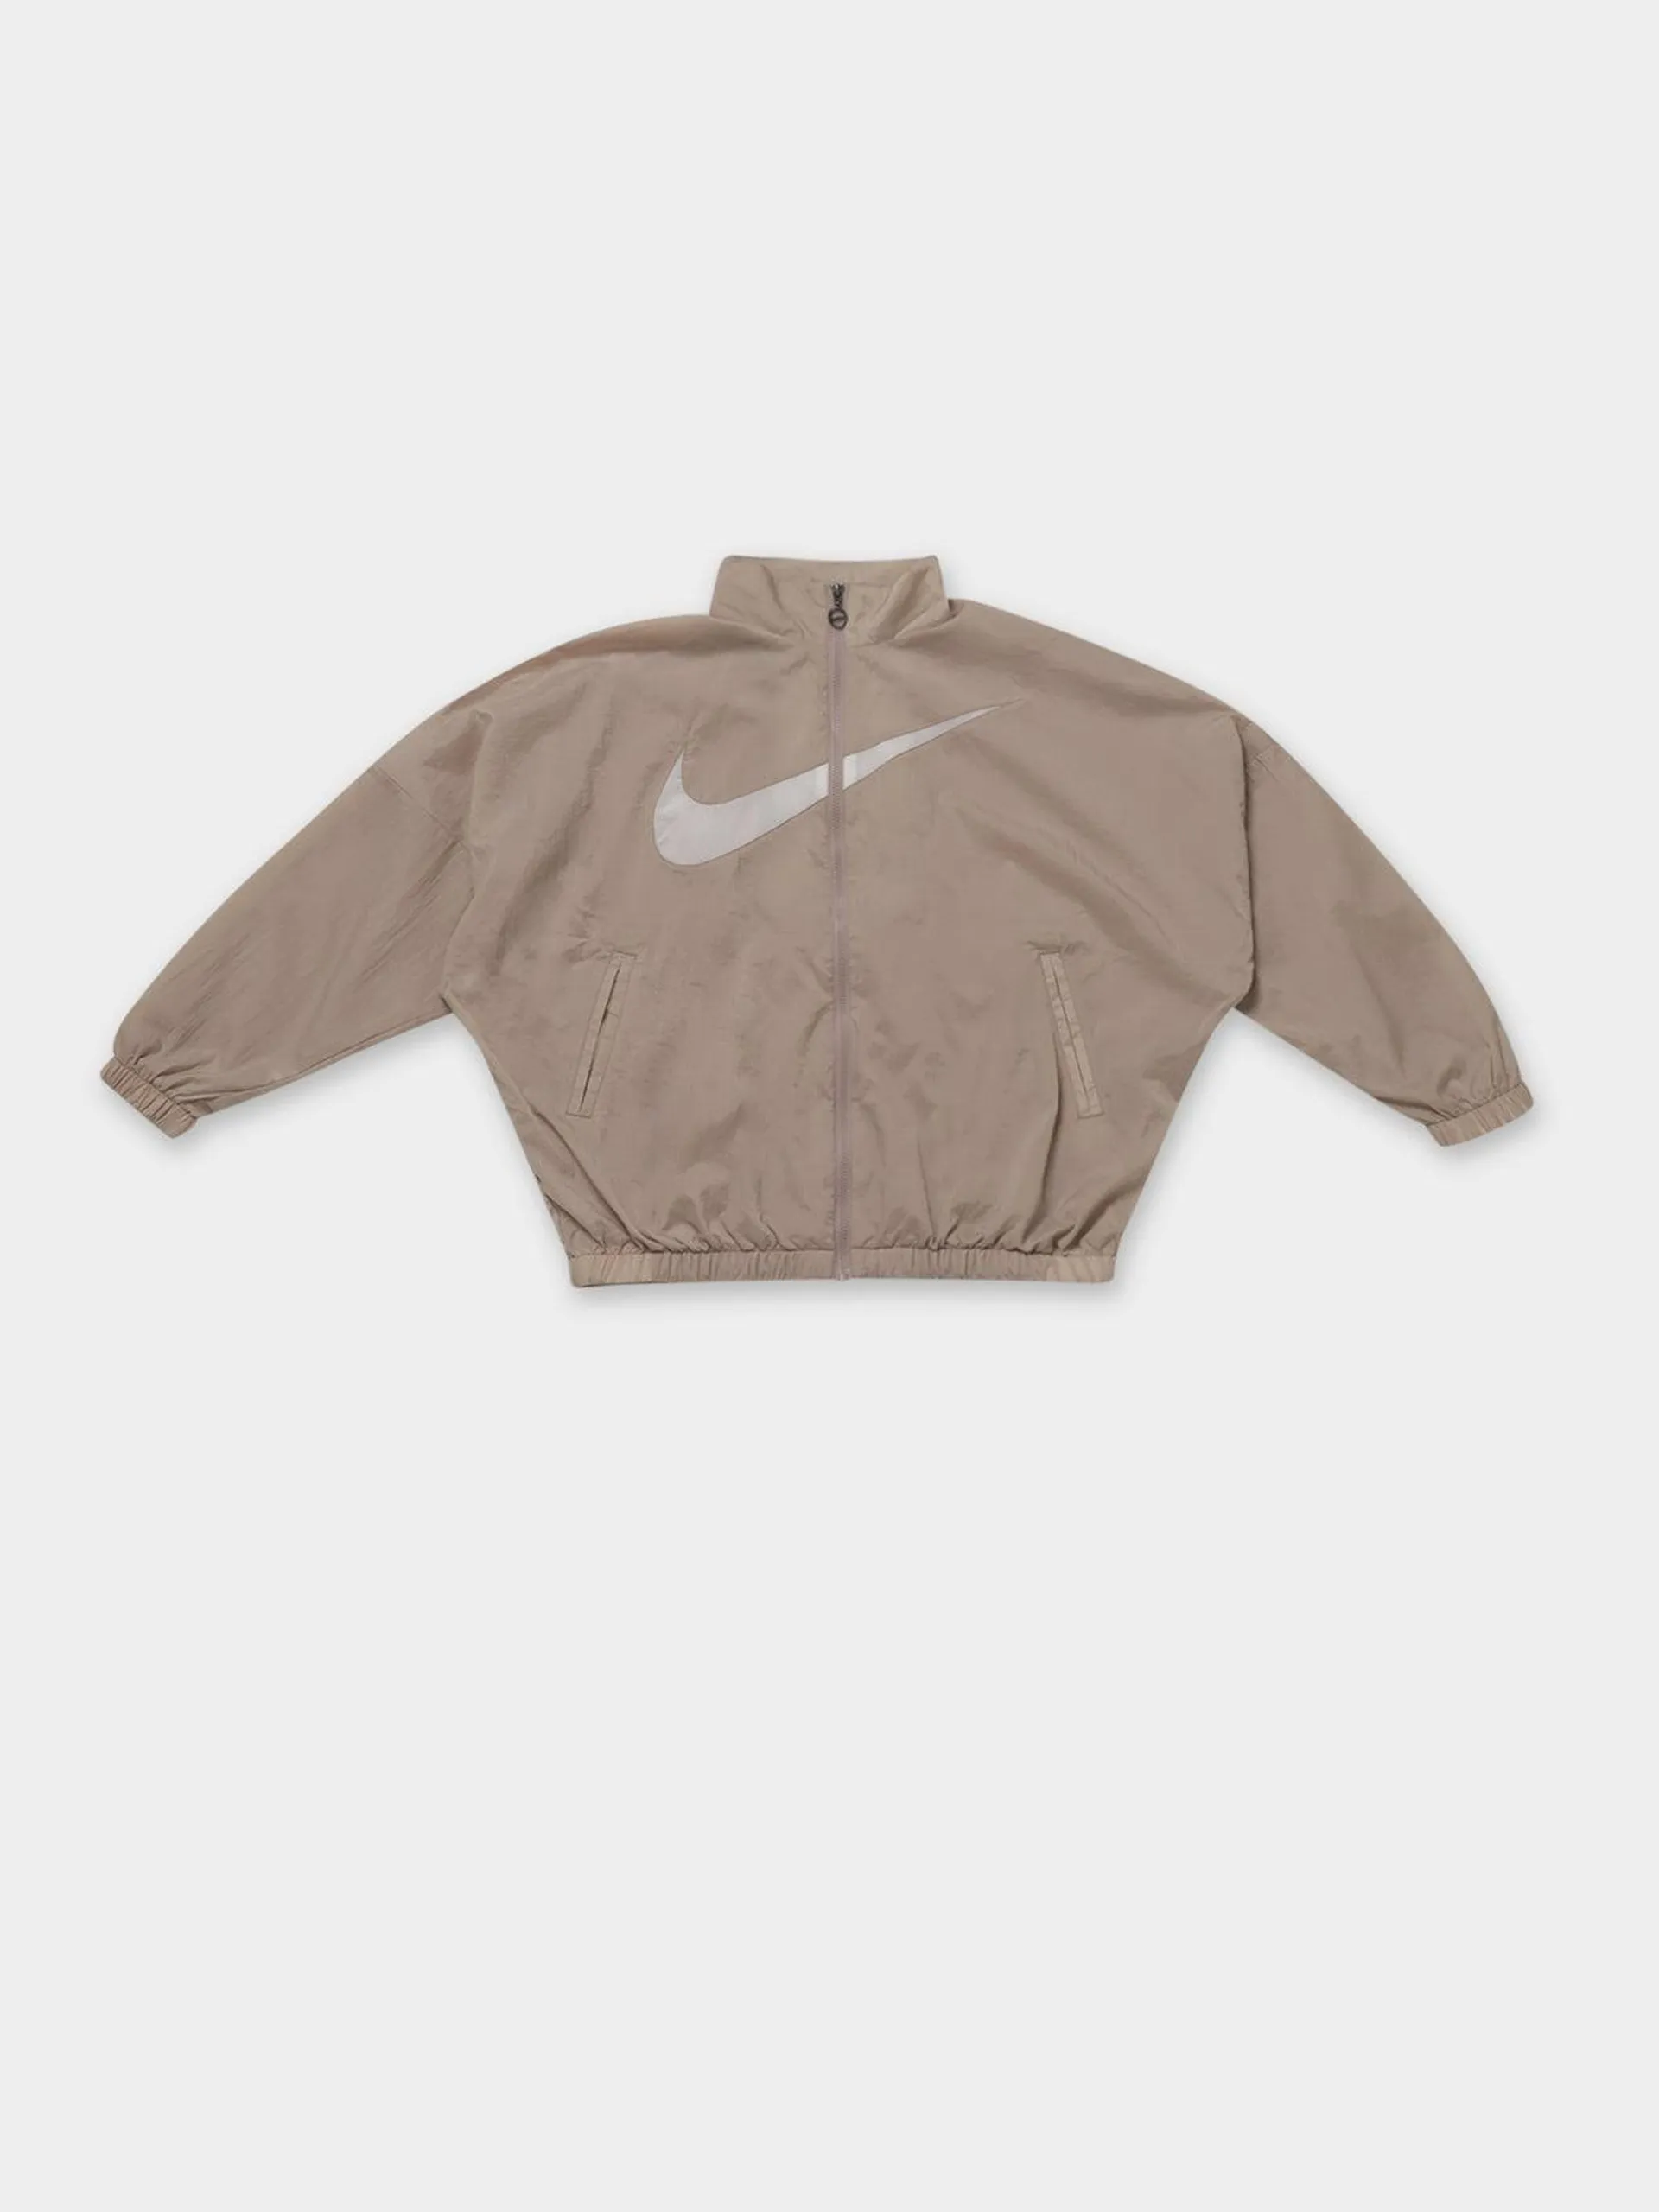 Sportswear Essentials Woven Jacket in Diffused Taupe & White